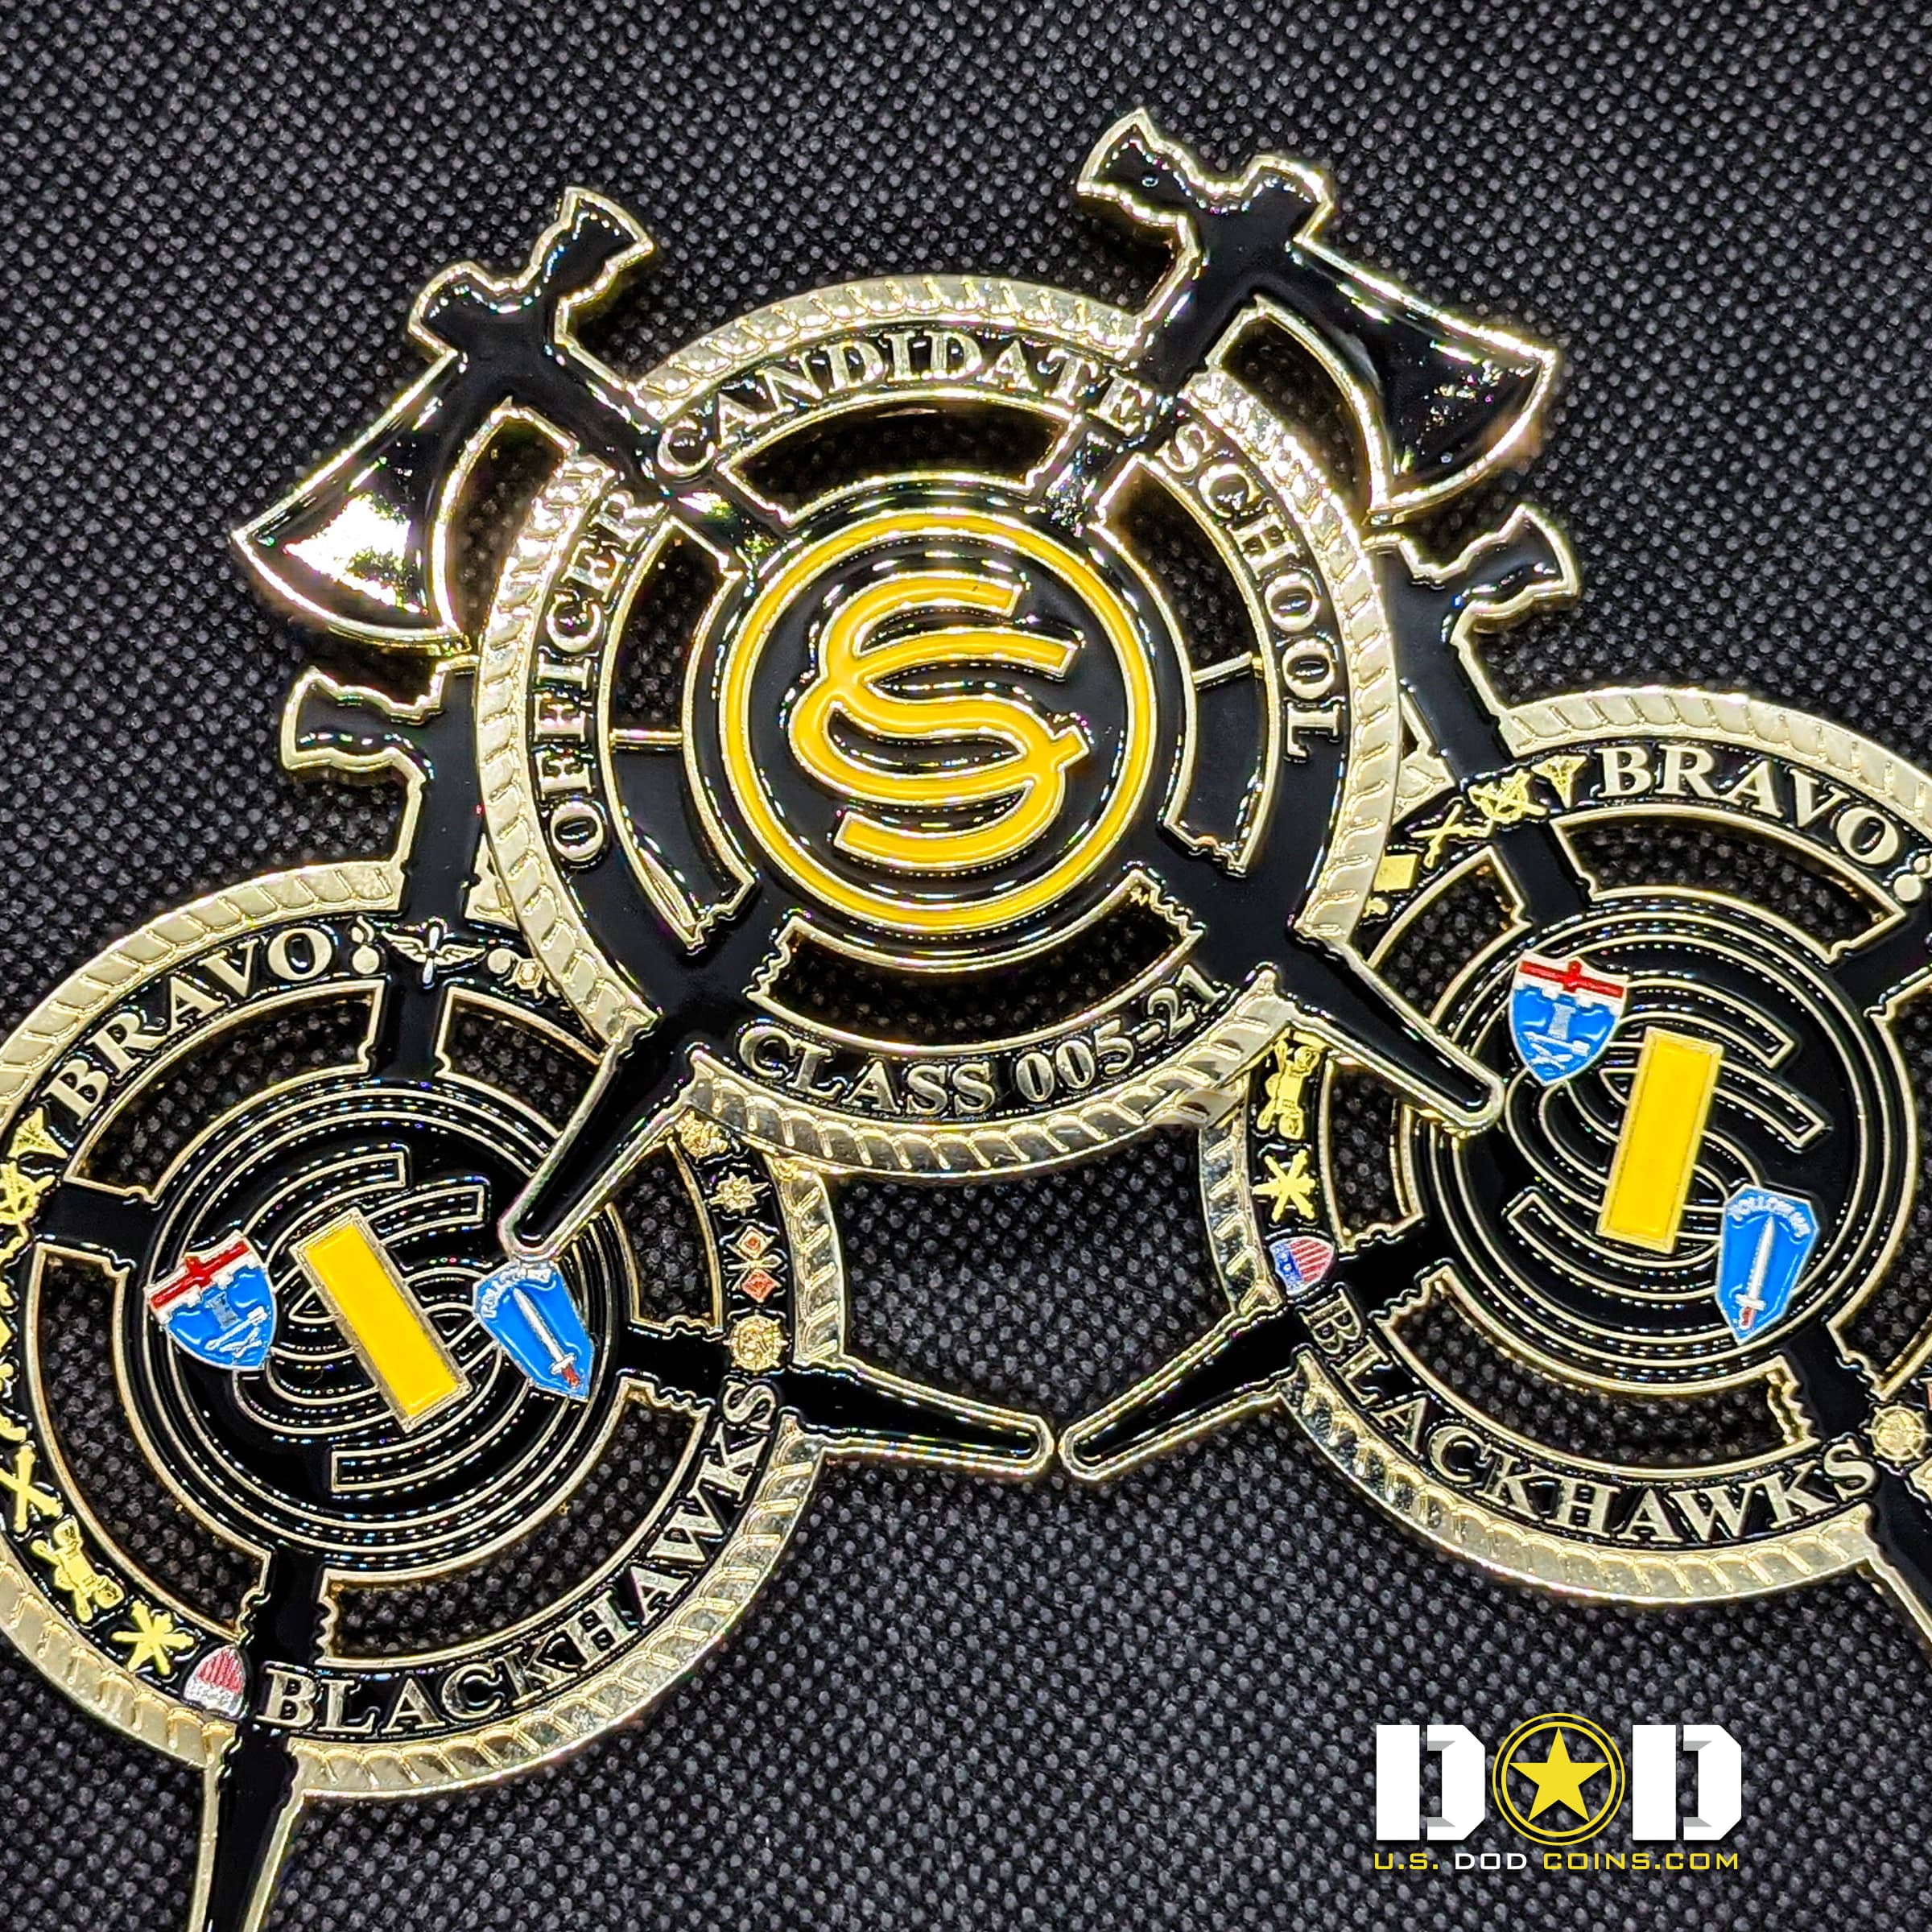 Officer-Candidate-School-Bravo-Blackhawks-Challenge-Coin_0003_USDODCoins-Challenge-Coins-Examples-30